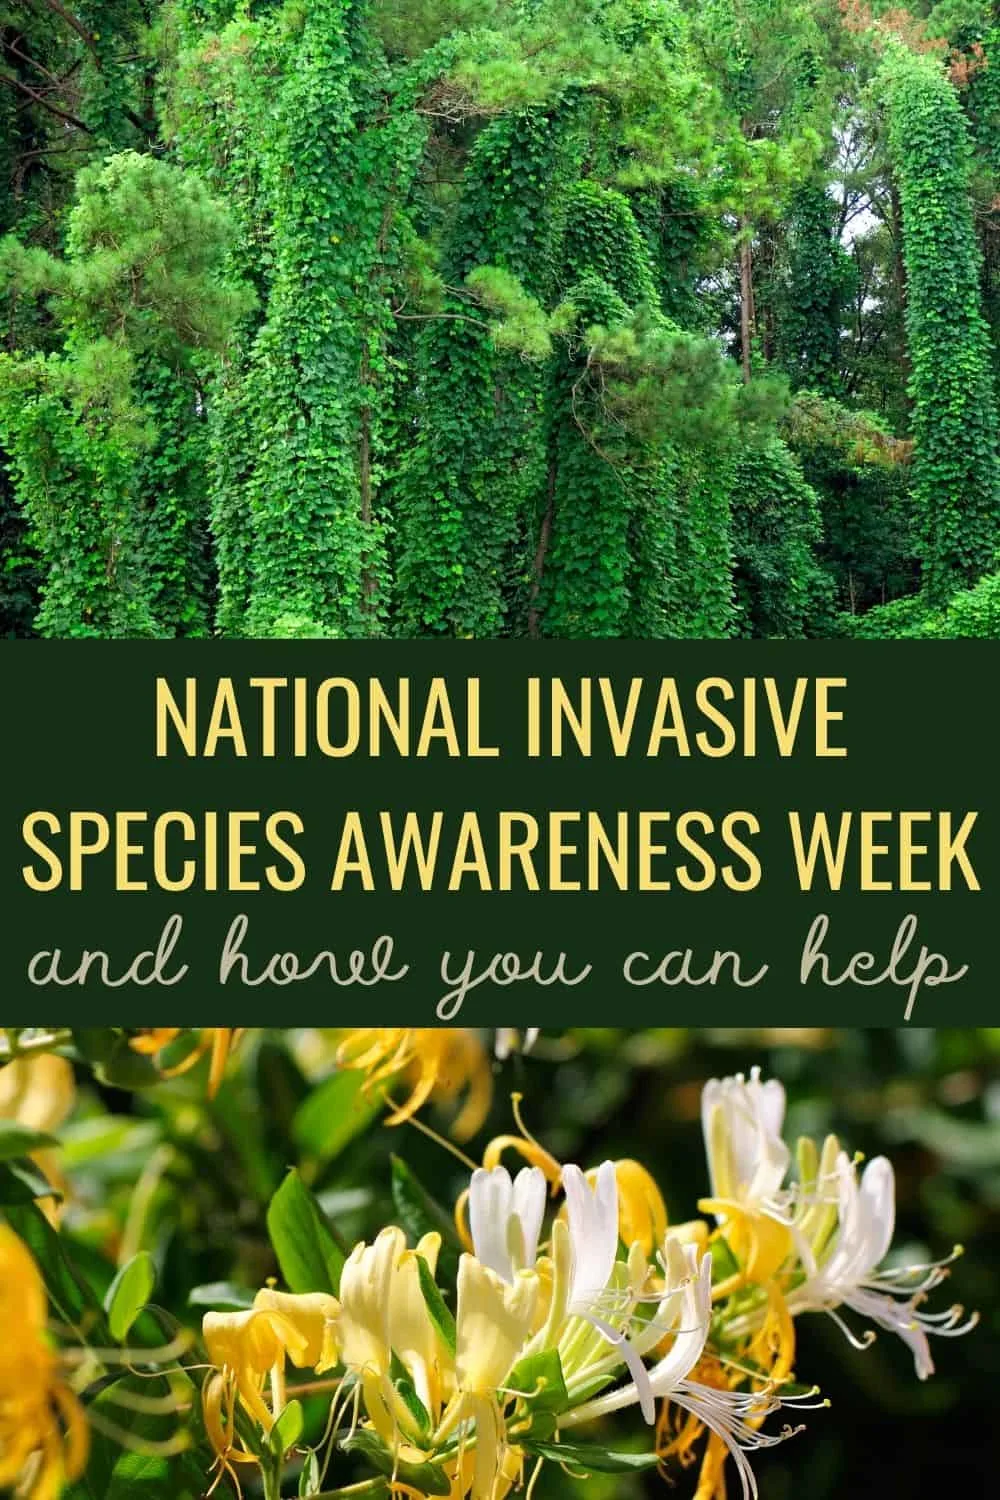 National invasive species awareness week - and how you can help